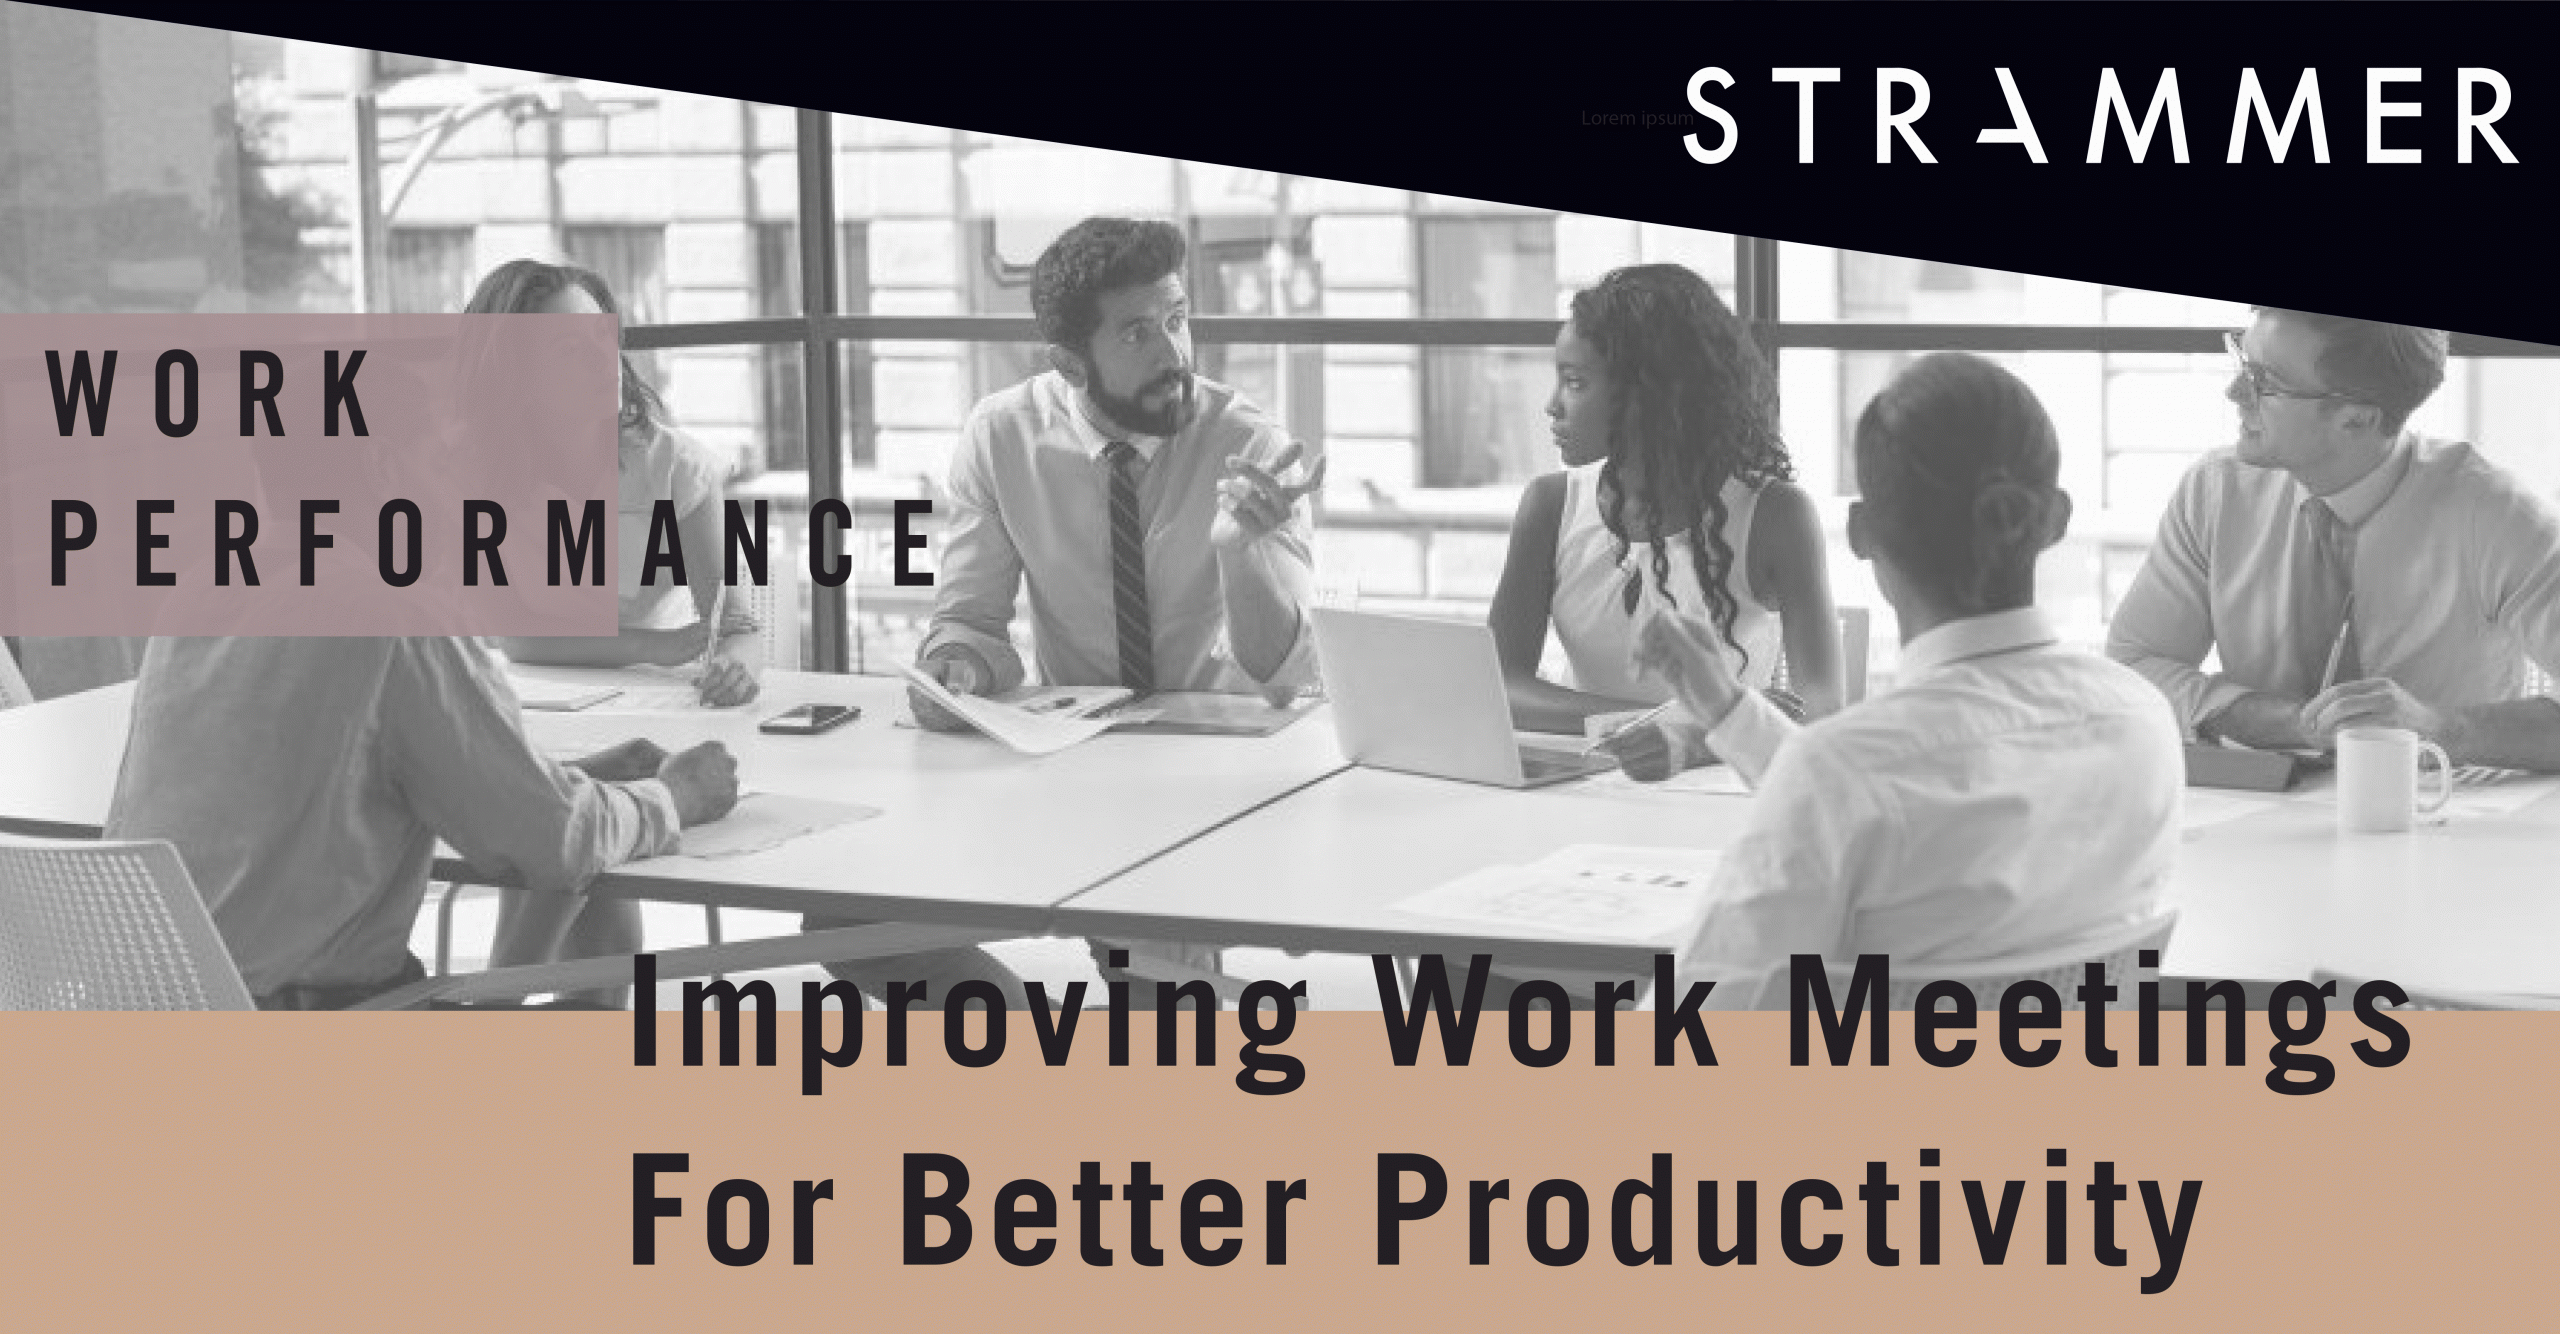 Work Meetings: How to Make Them More Effective?